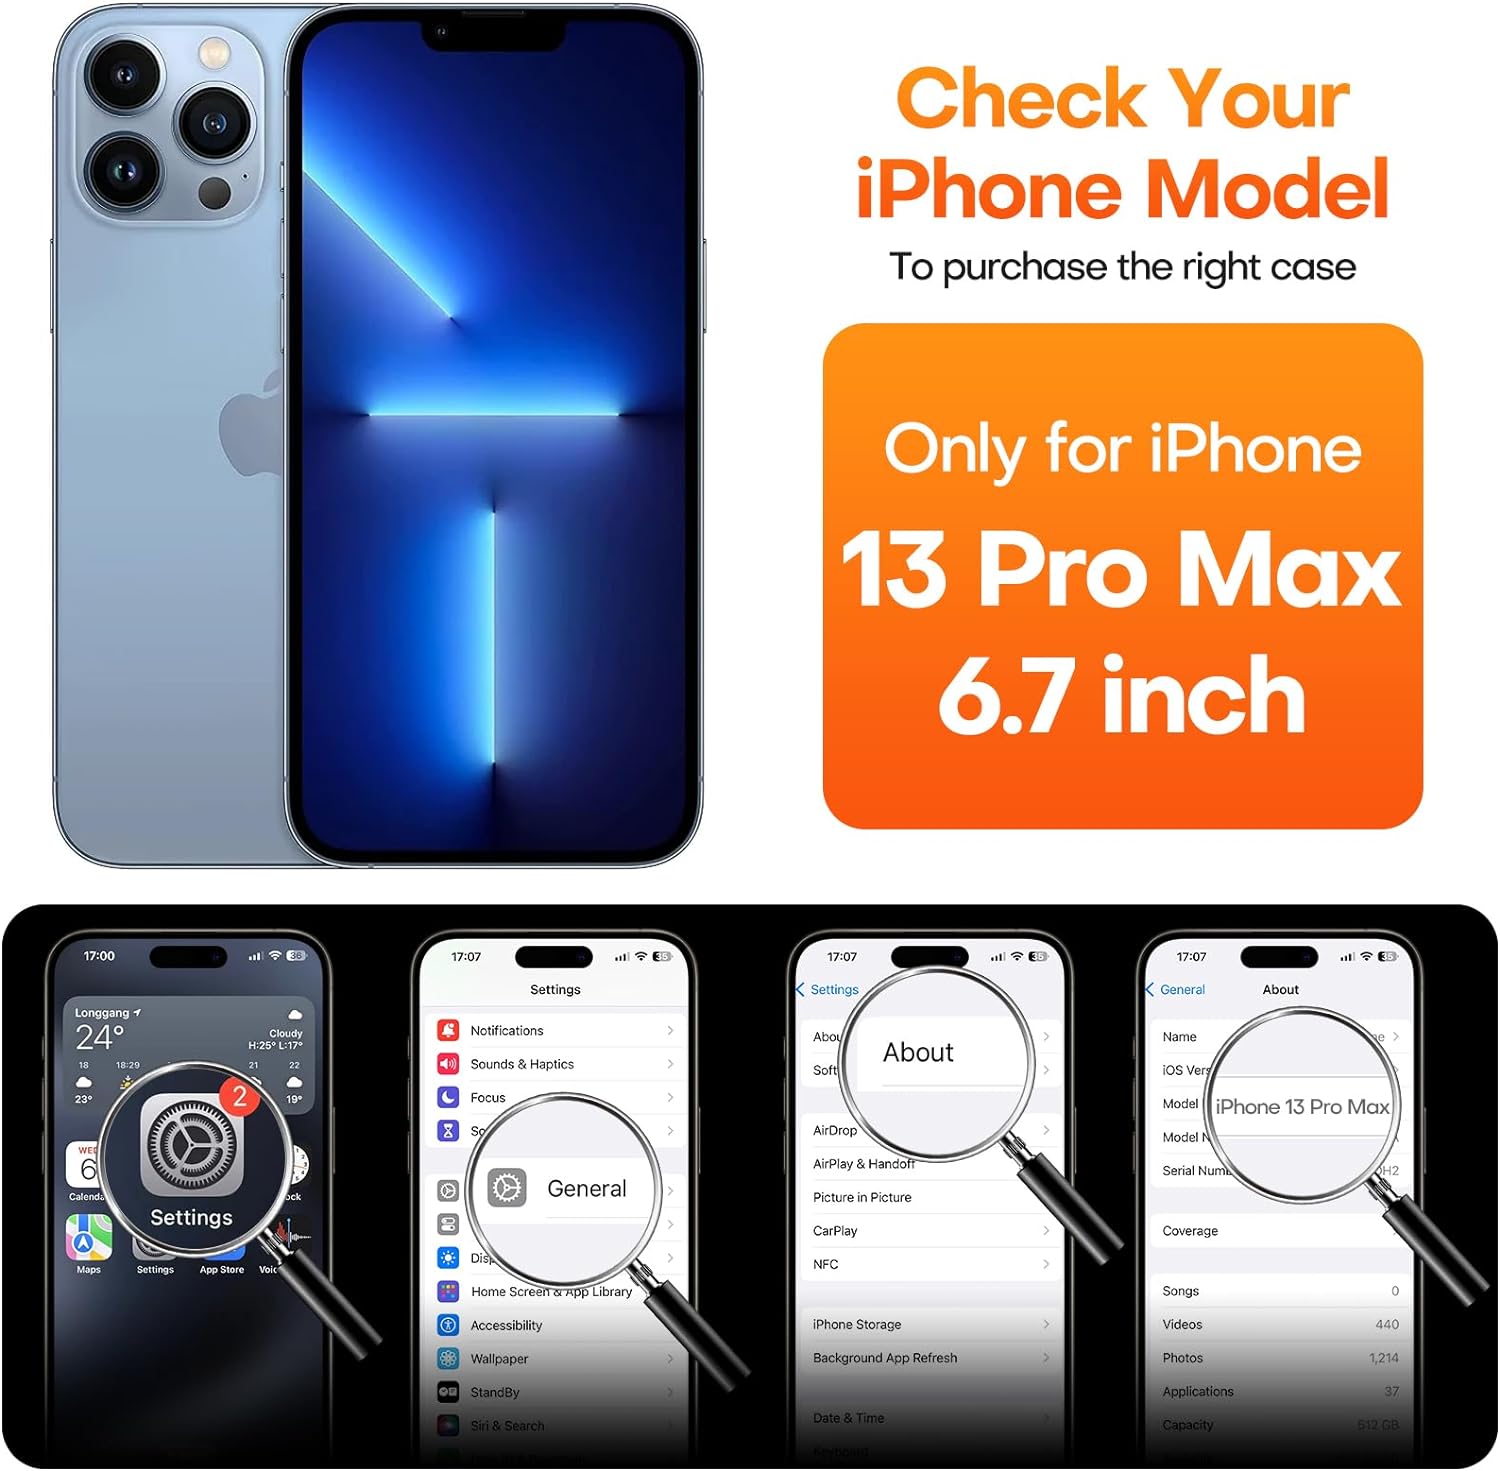 ImpactStrong Clear Guard for iPhone 13 Pro Max